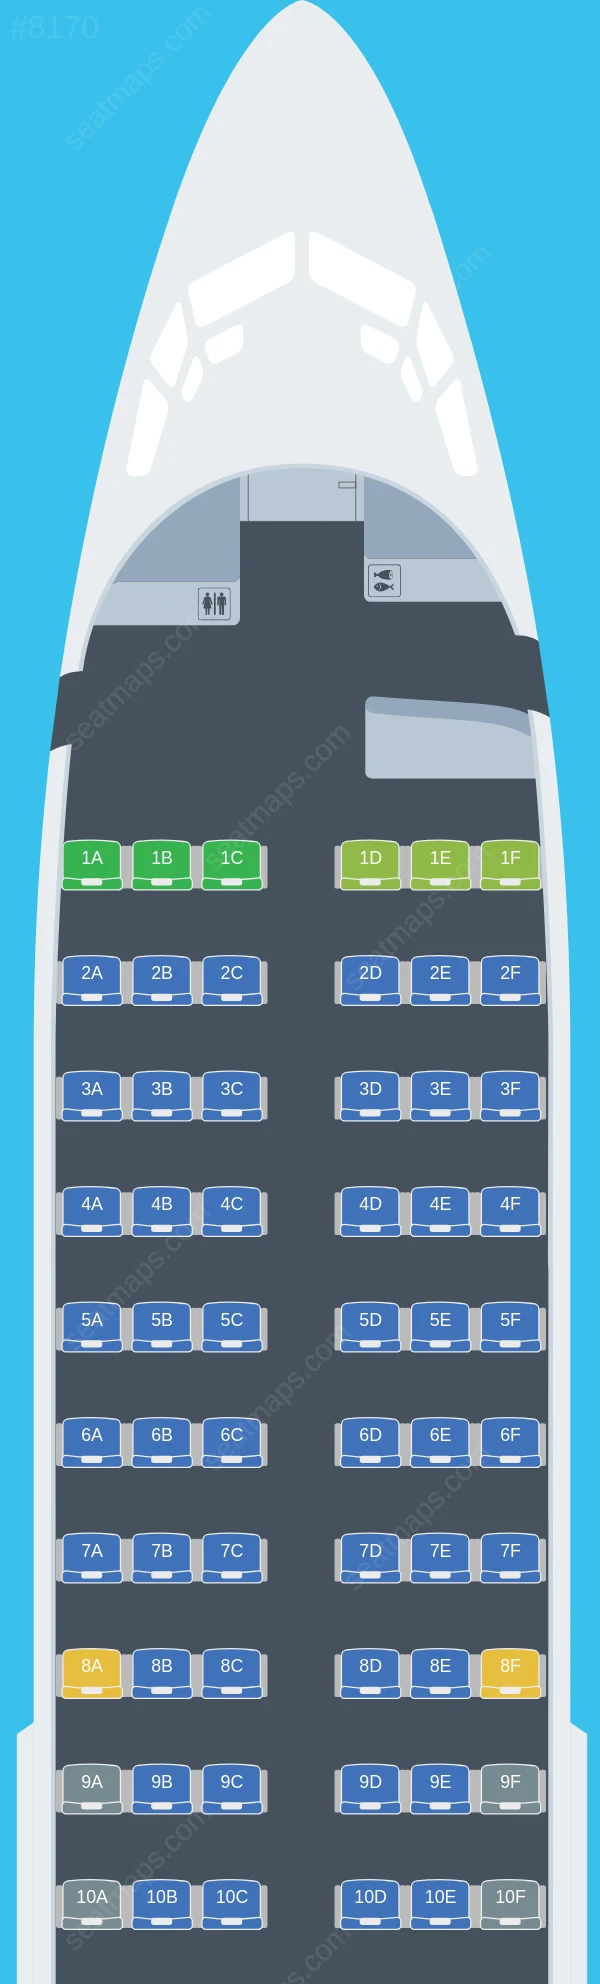 Fly Baghdad Boeing 737-700 seatmap preview